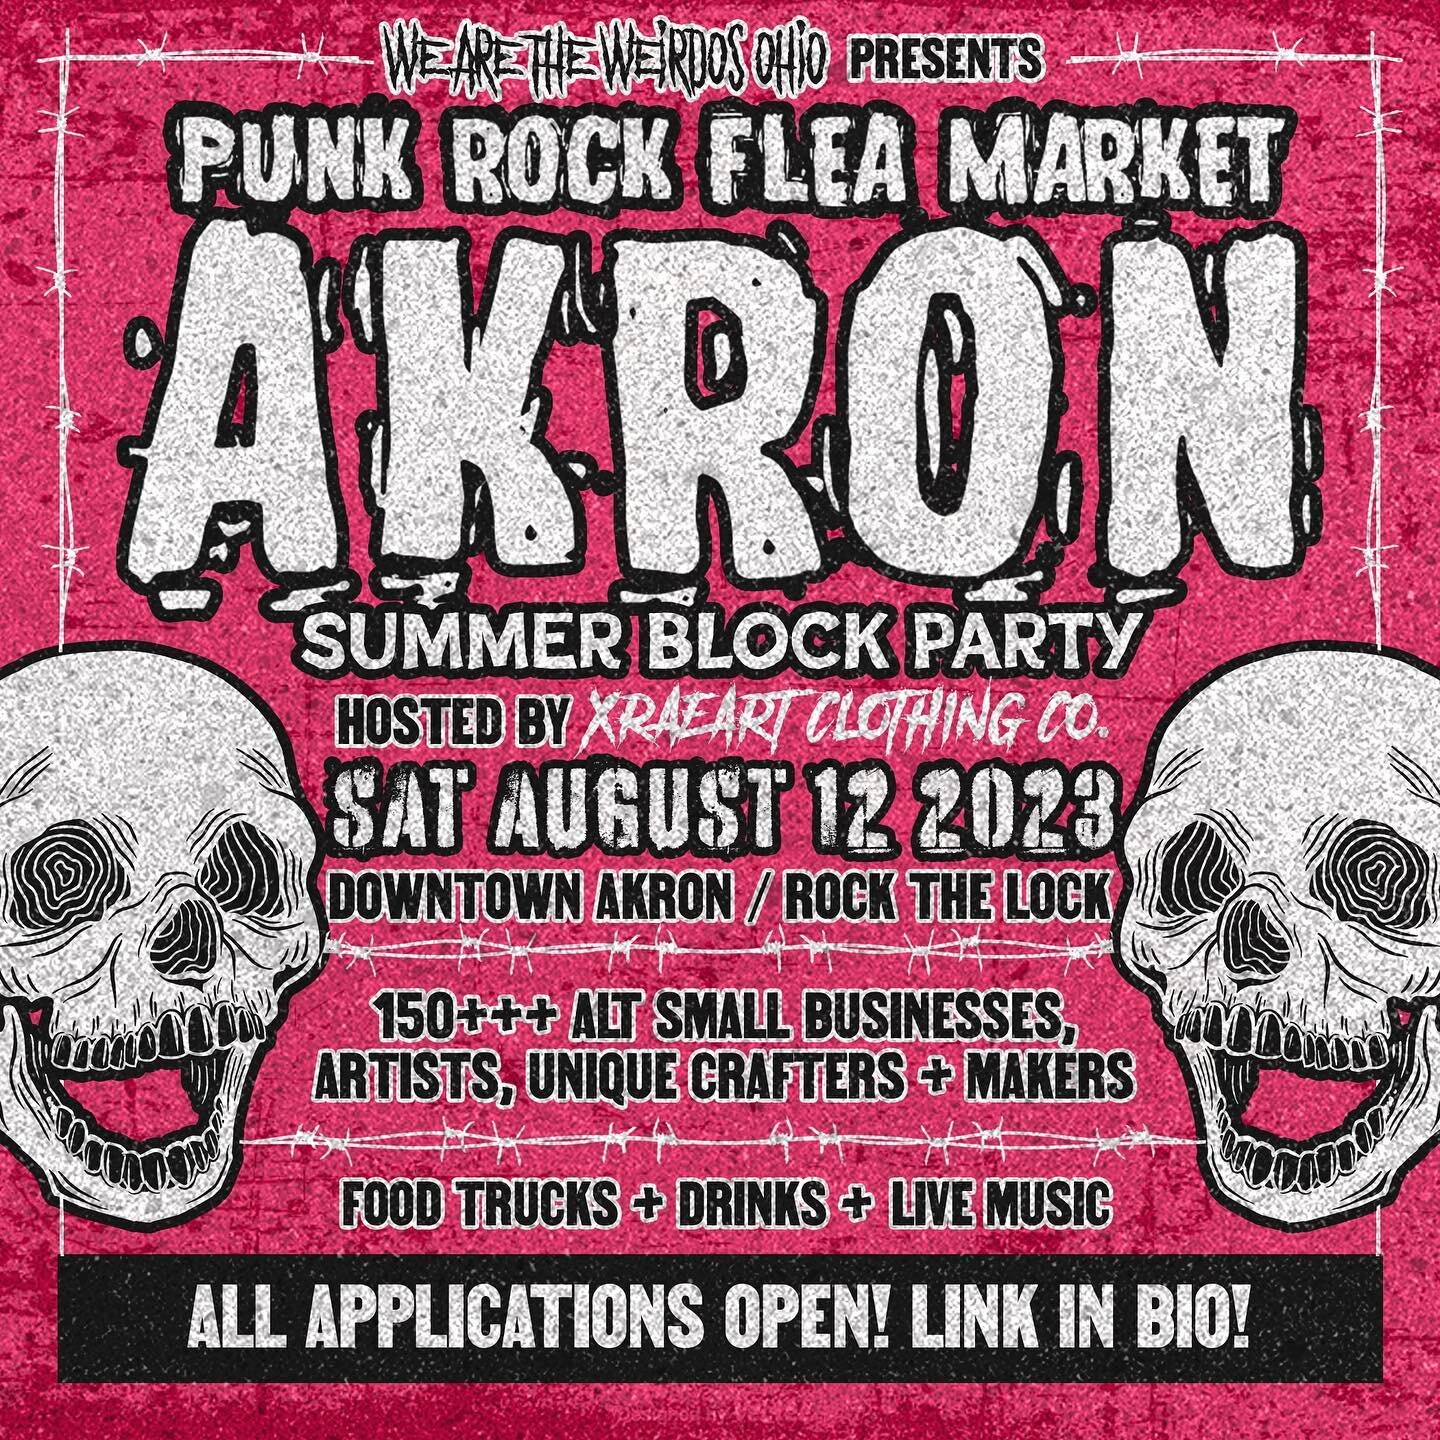 IT&rsquo;S MF&rsquo;ING TIME!!! 

Punk Rock Flea Market Akron is returning to downtown Akron this summer for our Summer Block Party on Saturday, August 12th 💀🤘🔥 11am - 6:30pm @ The Rock the Lock concert series located in Downtown Akron Ohio!

Ther